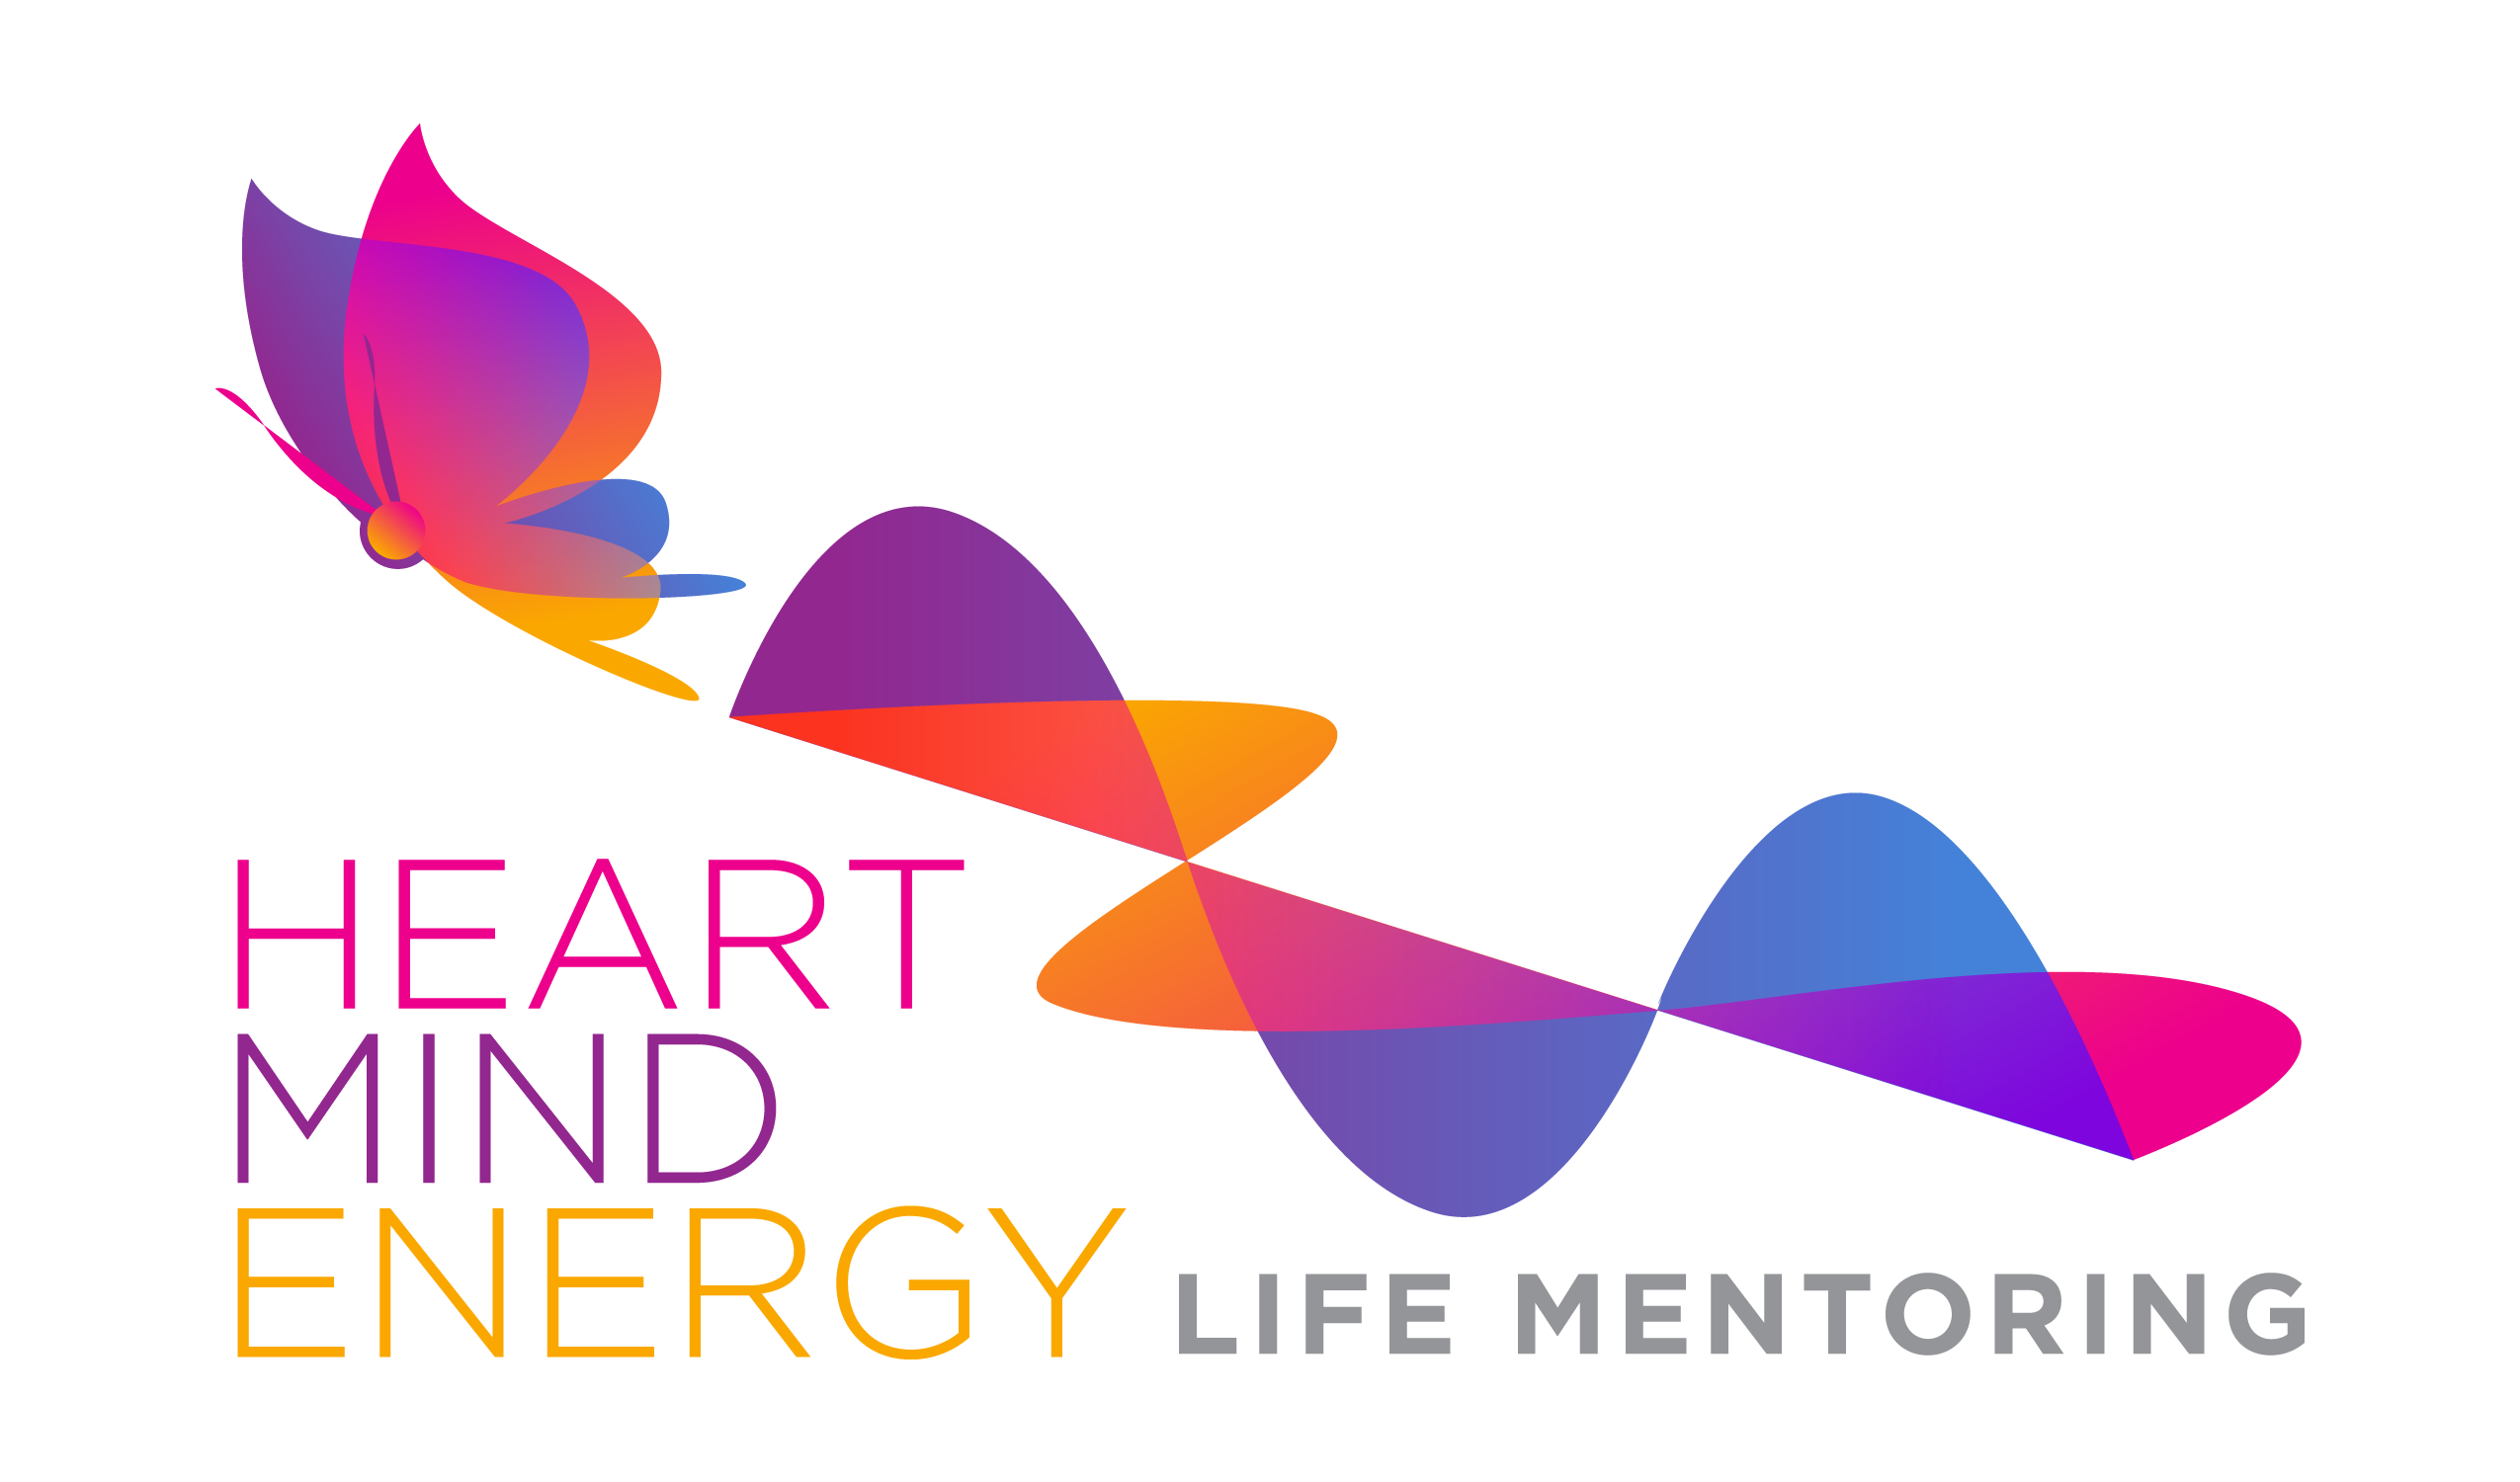 energy clipart fit for life